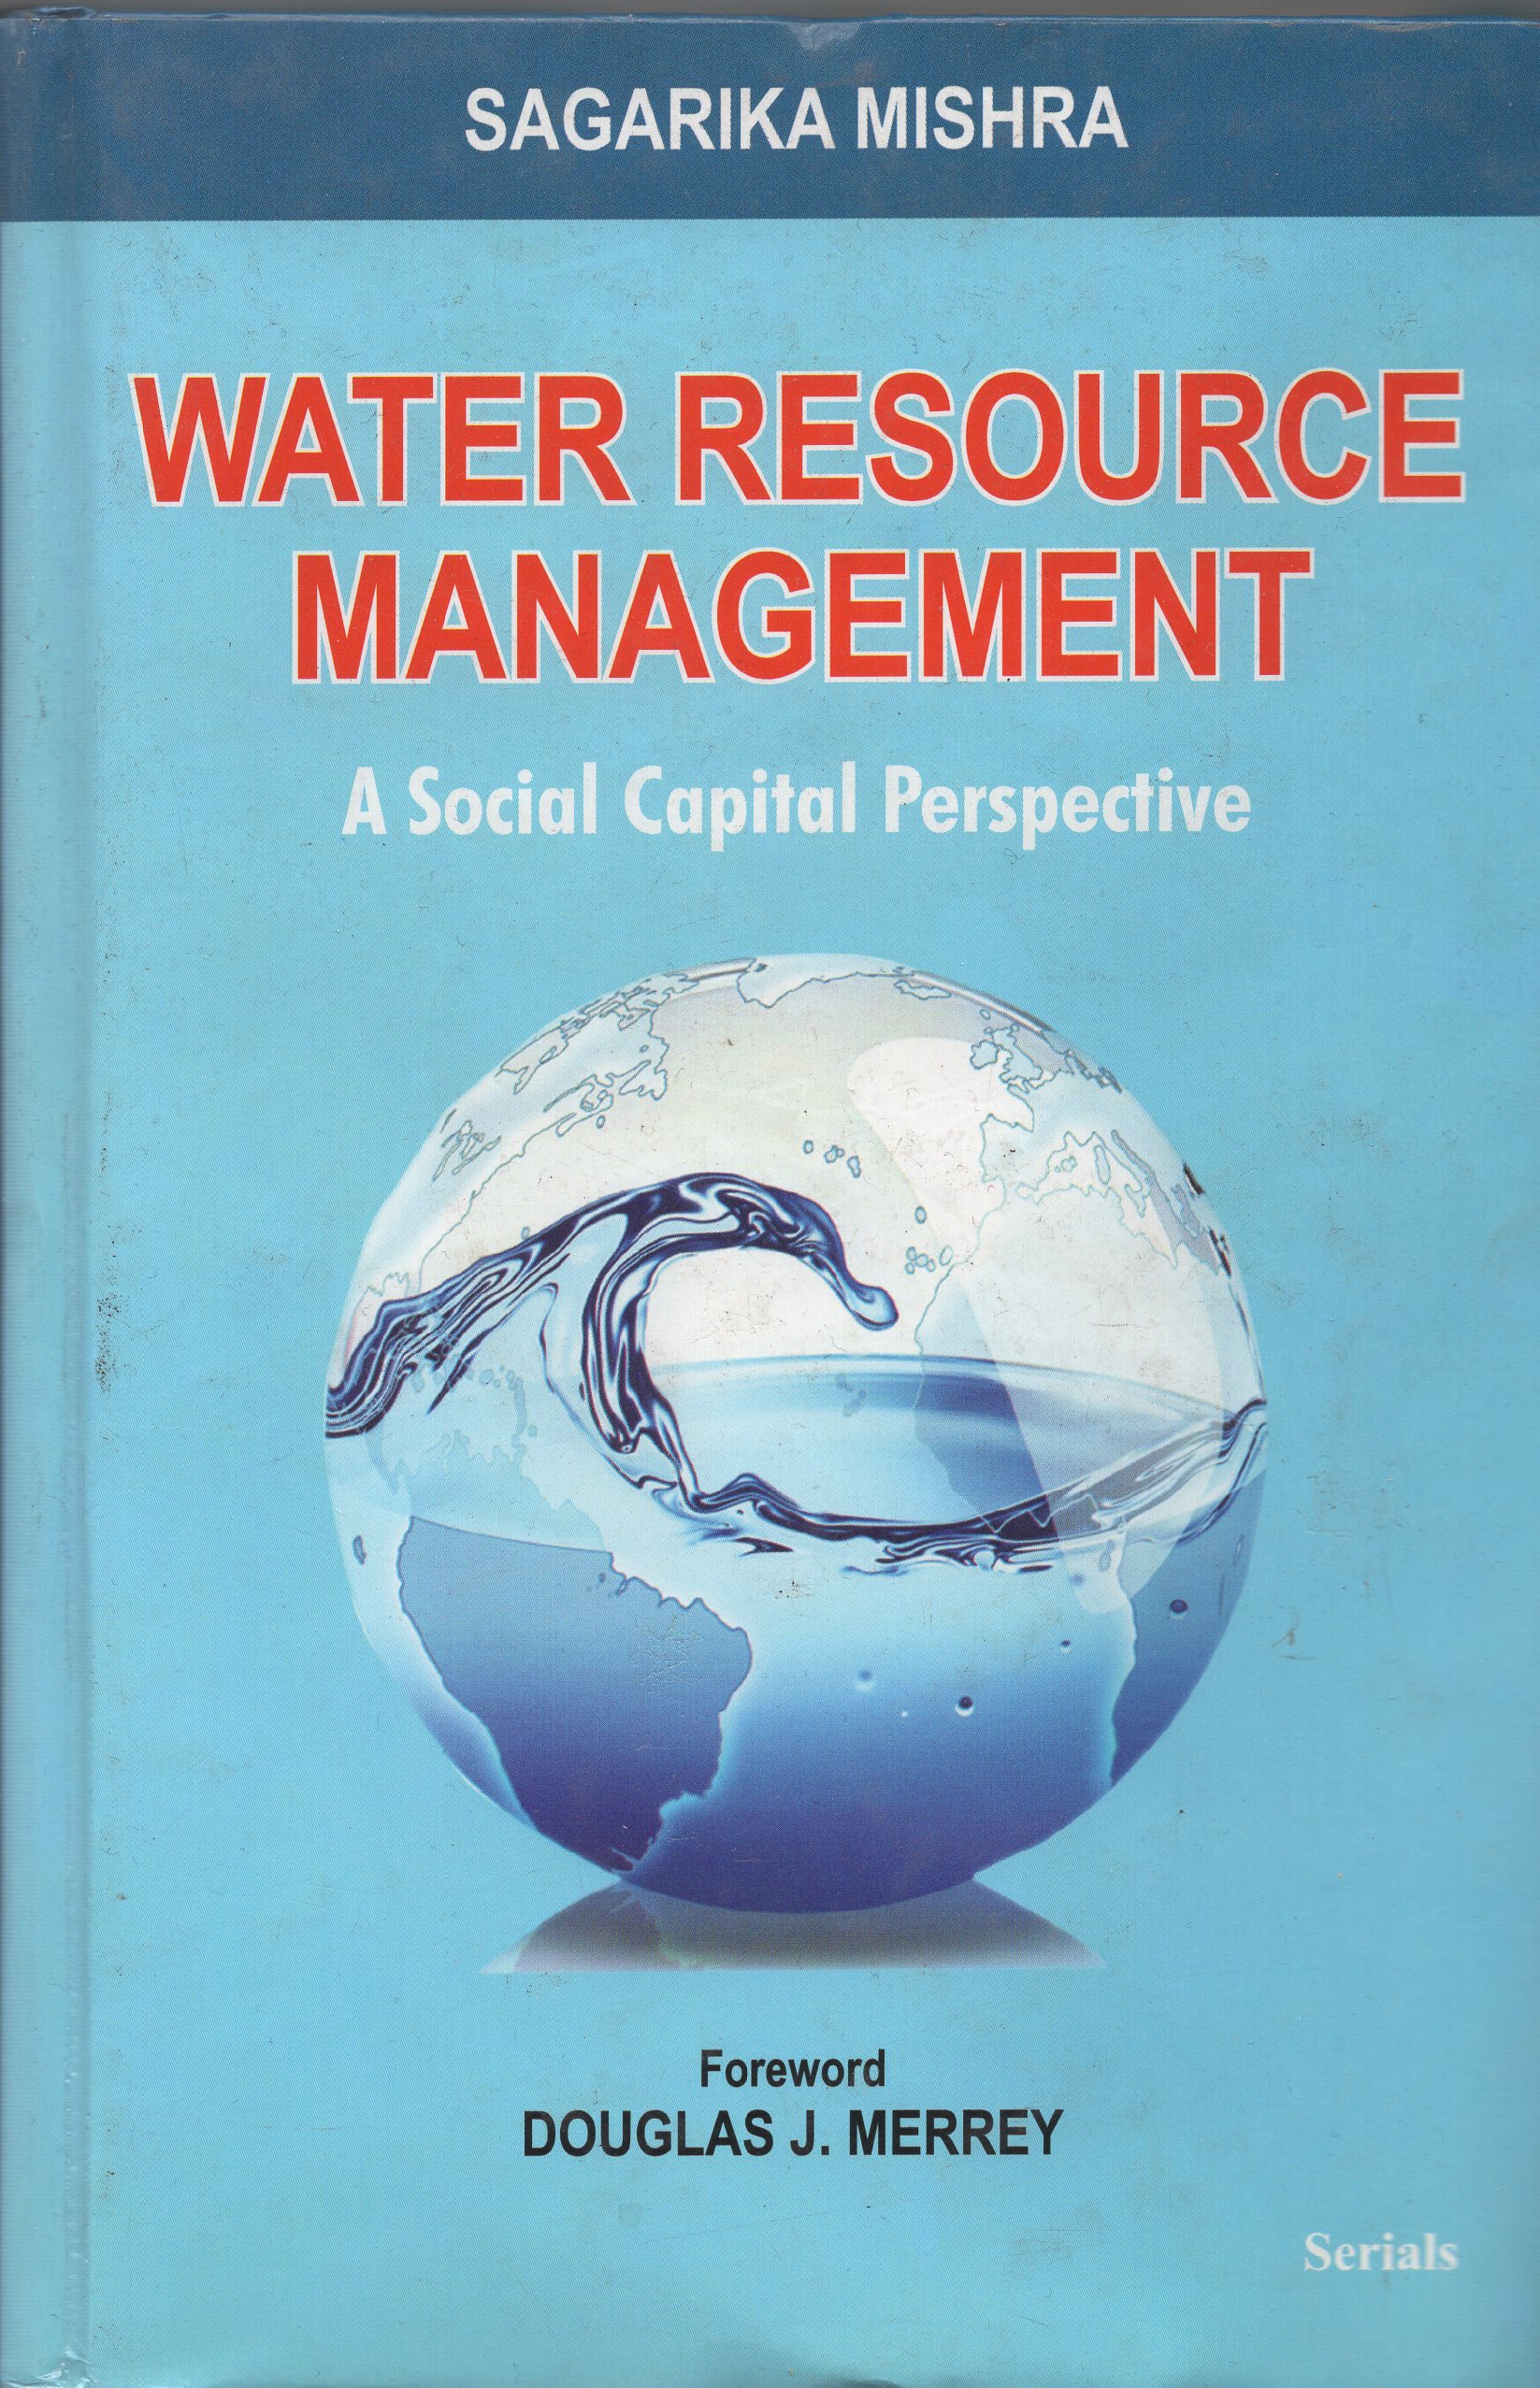 Water Resource Management: A Social Capital Perspective